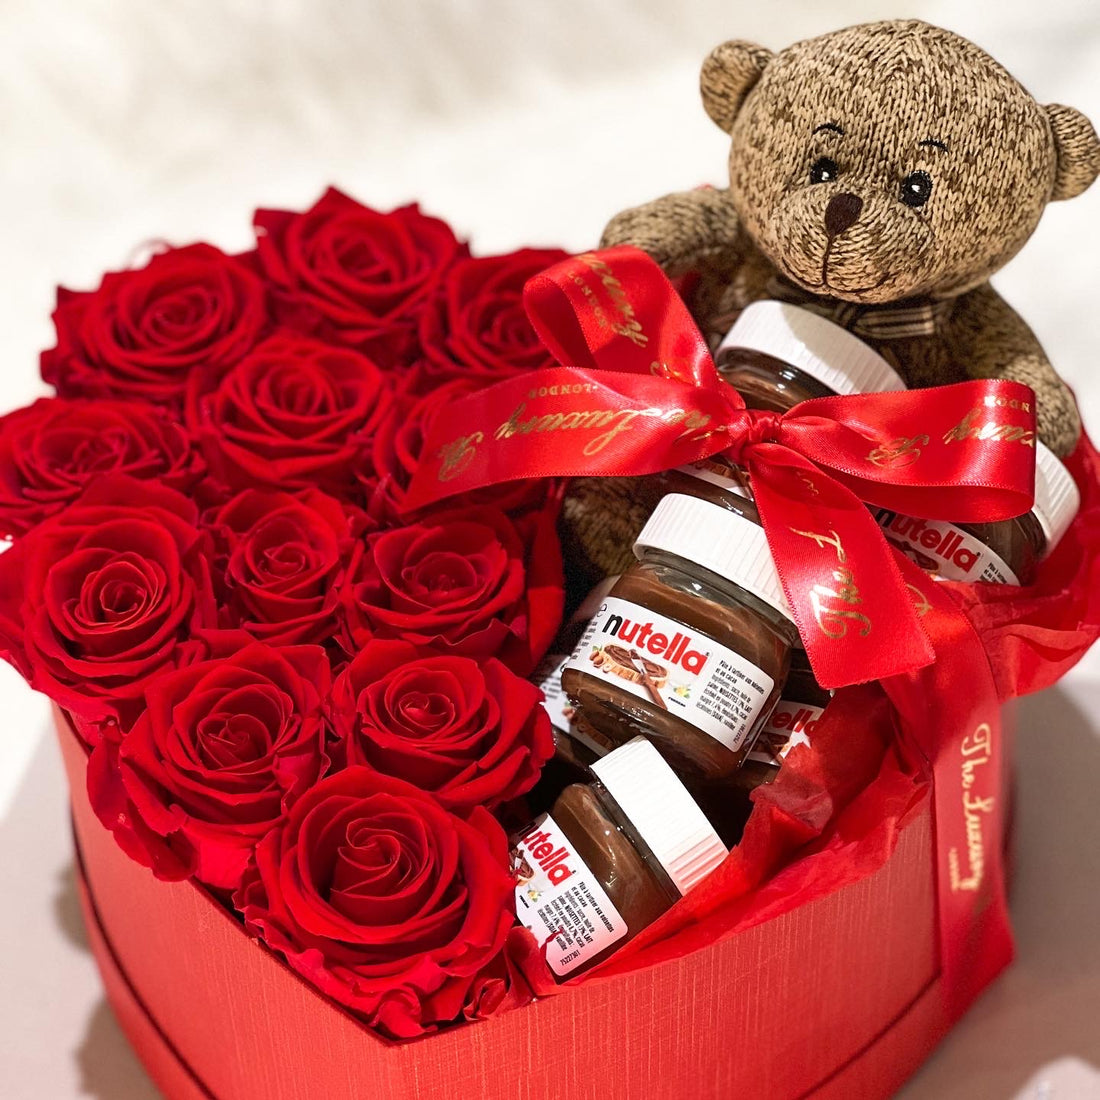 Preserved eternity roses and nutella gift set in heart shaped box with teddy bear